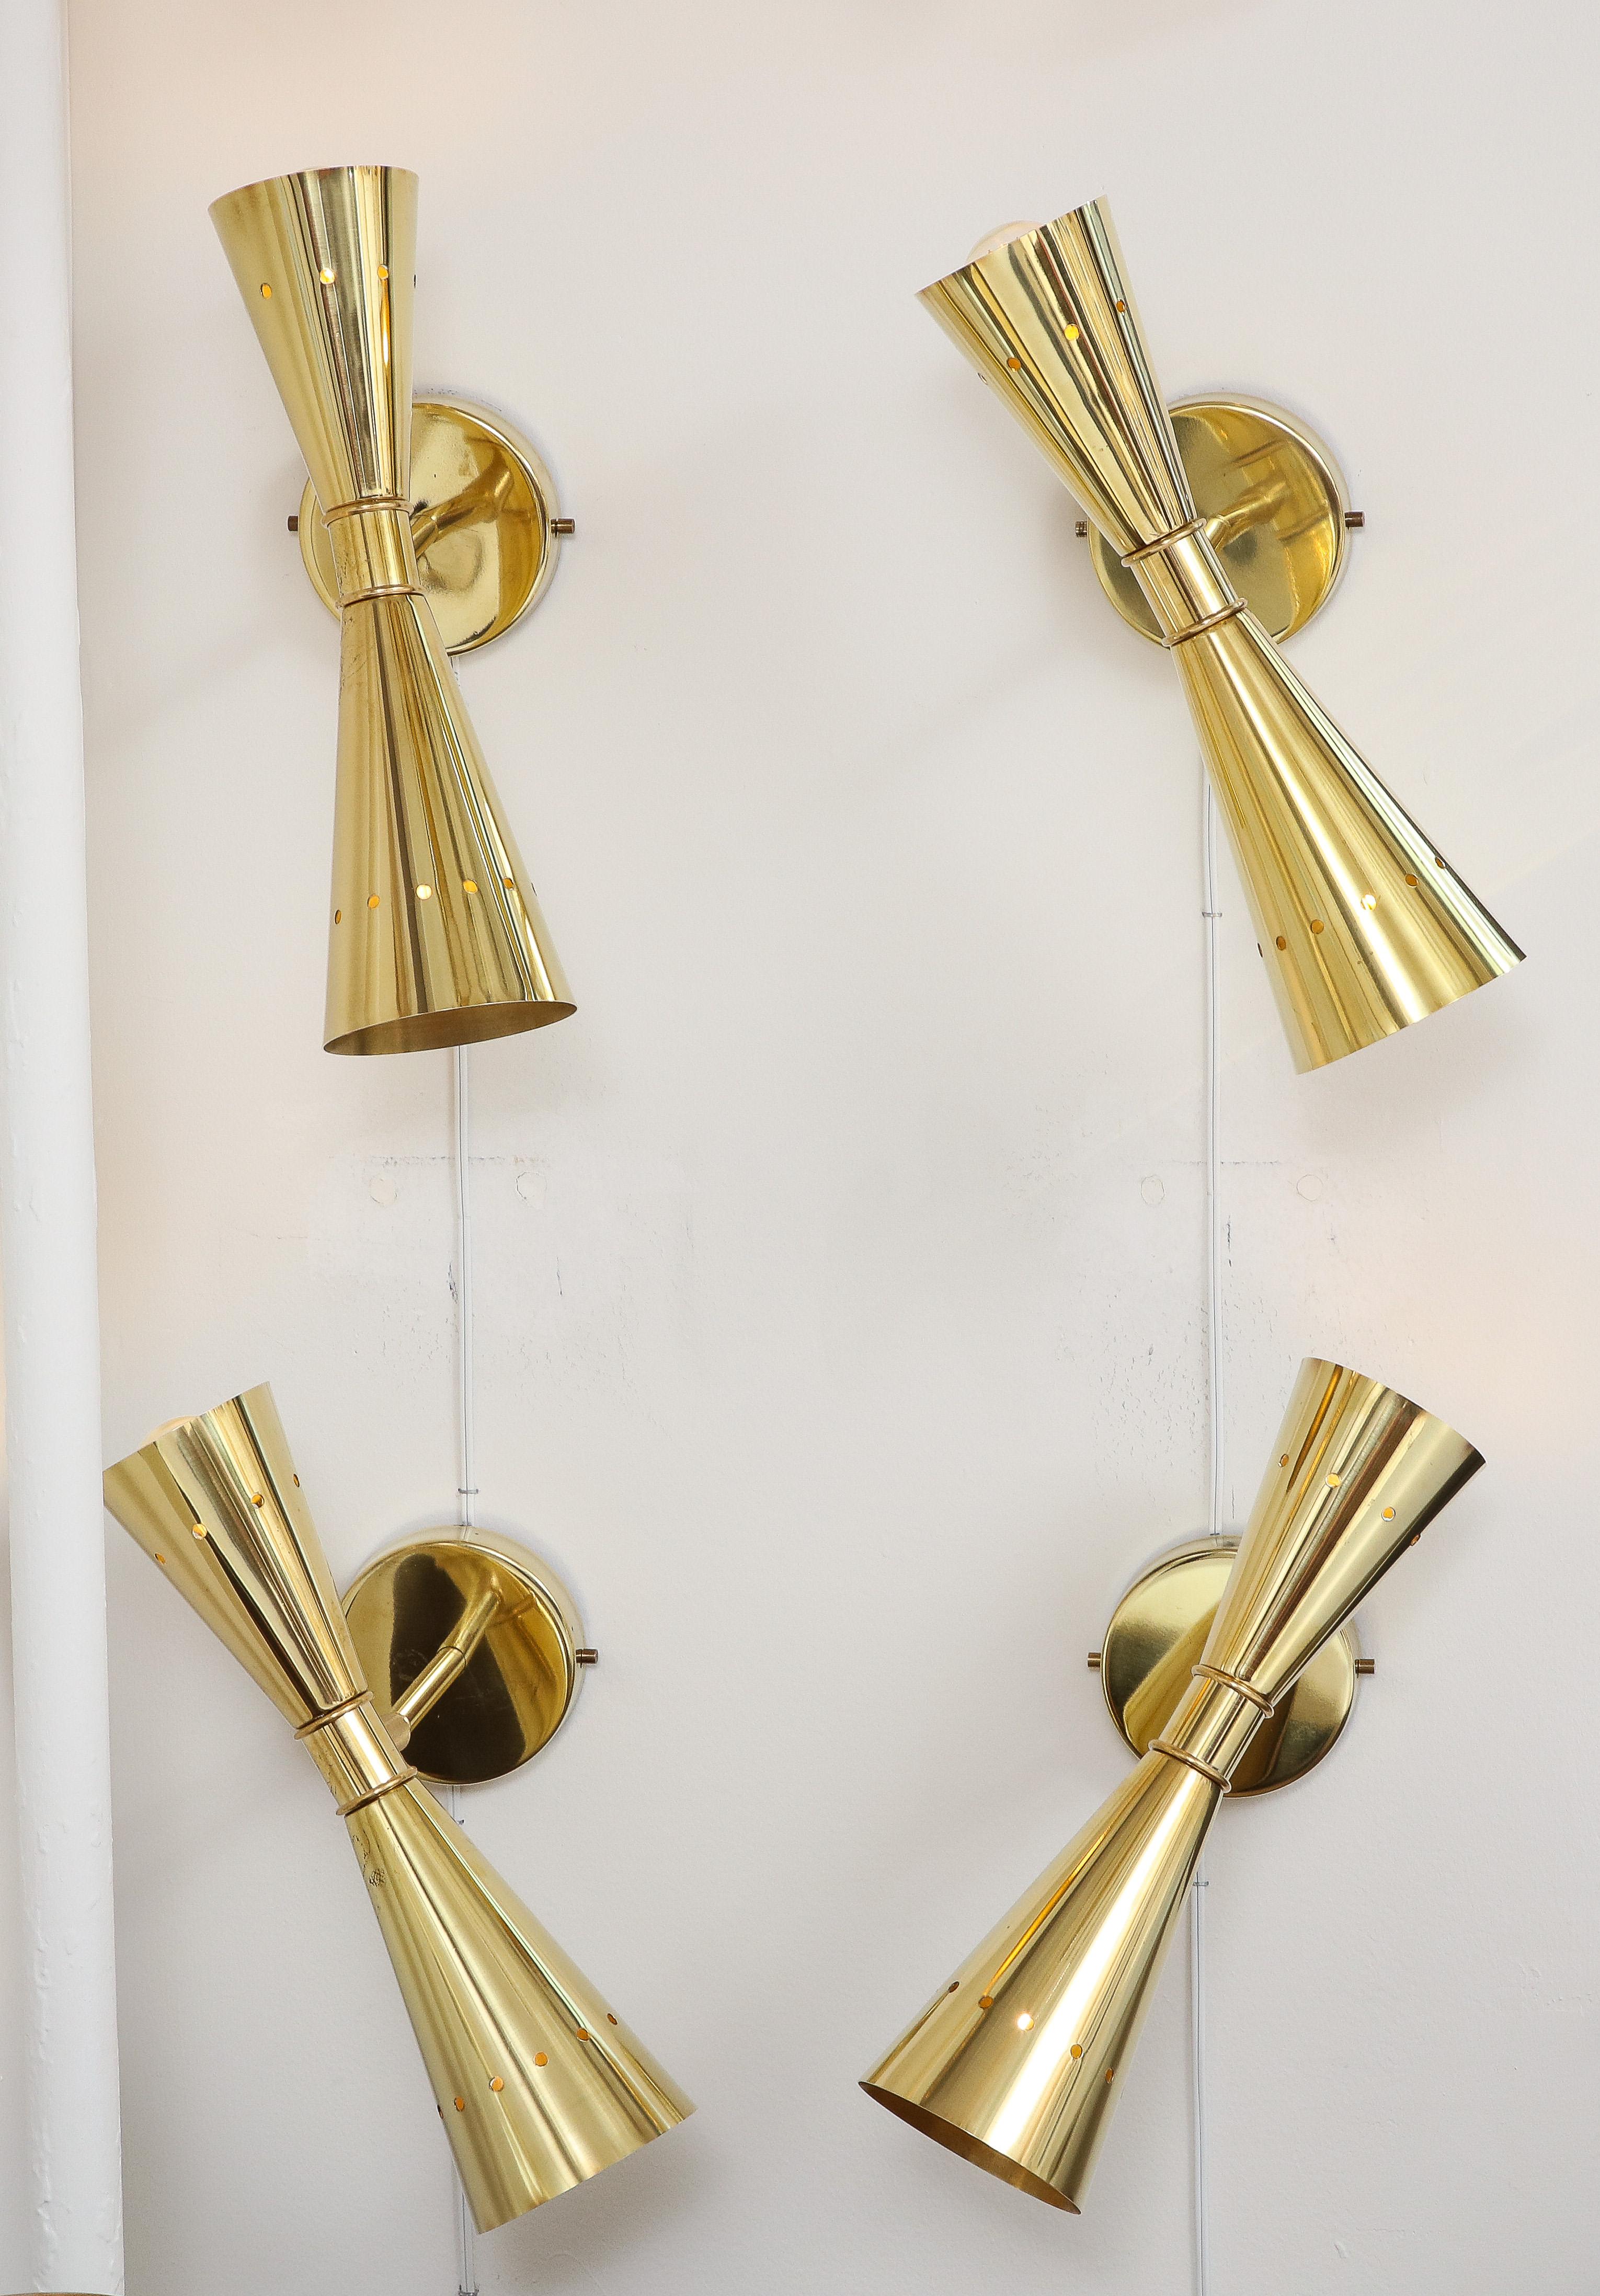 Set of Four (4) polished brass double cone (conical) swivel sconces, handmade in Italy. 
Two conical shaped brass structures, one large and one small, make up these modernist sconces.  Perforated details on cones allow light to pass through, giving